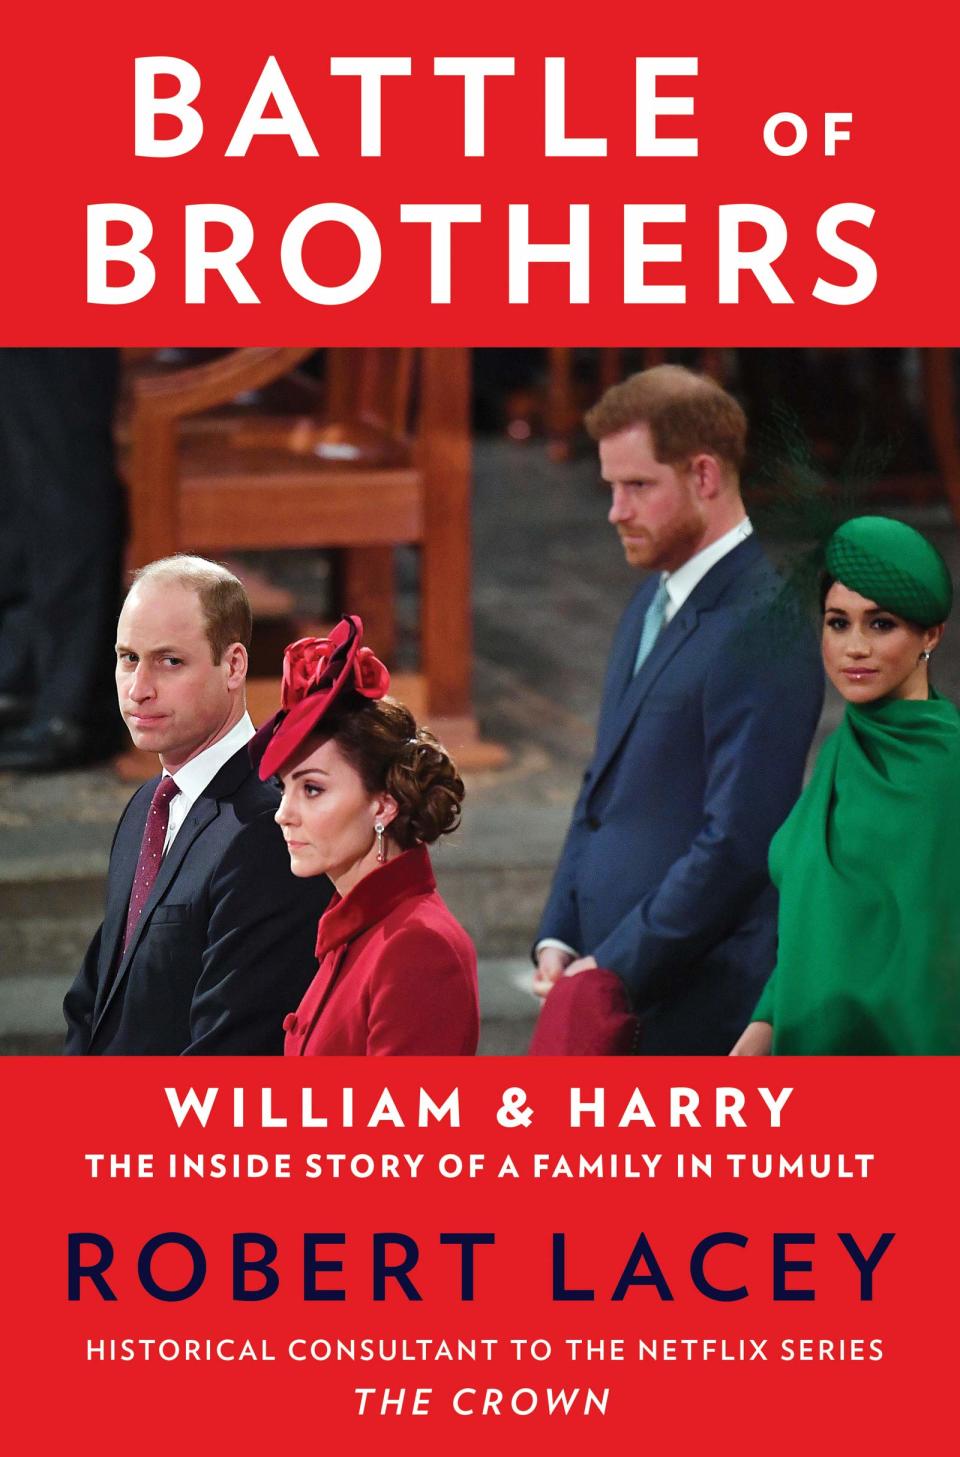 battle of brothers book william harry